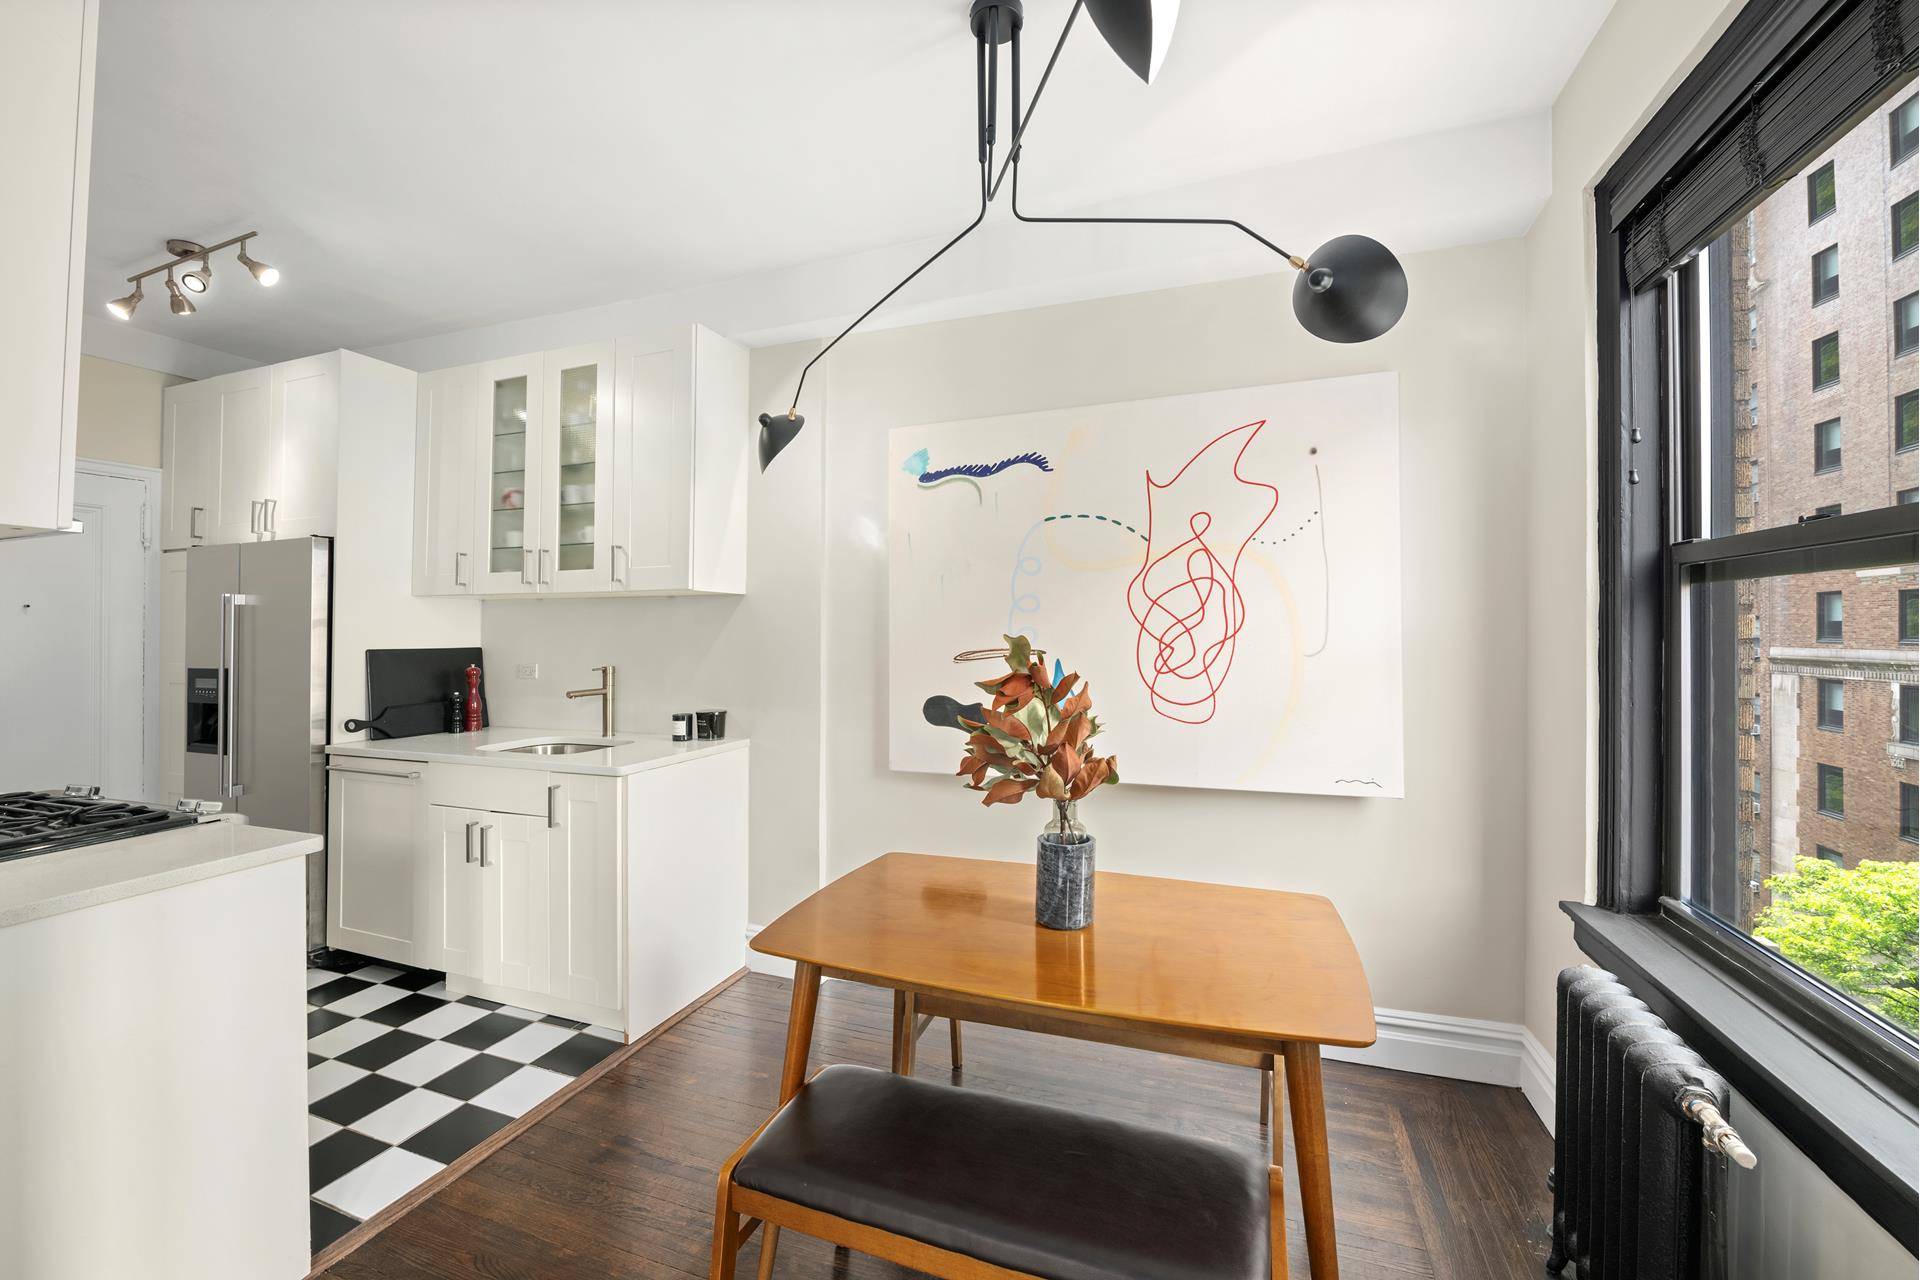 Welcome home to the Majestic, located in the heart of the Upper West Side, where classic charm meets modern convenience.